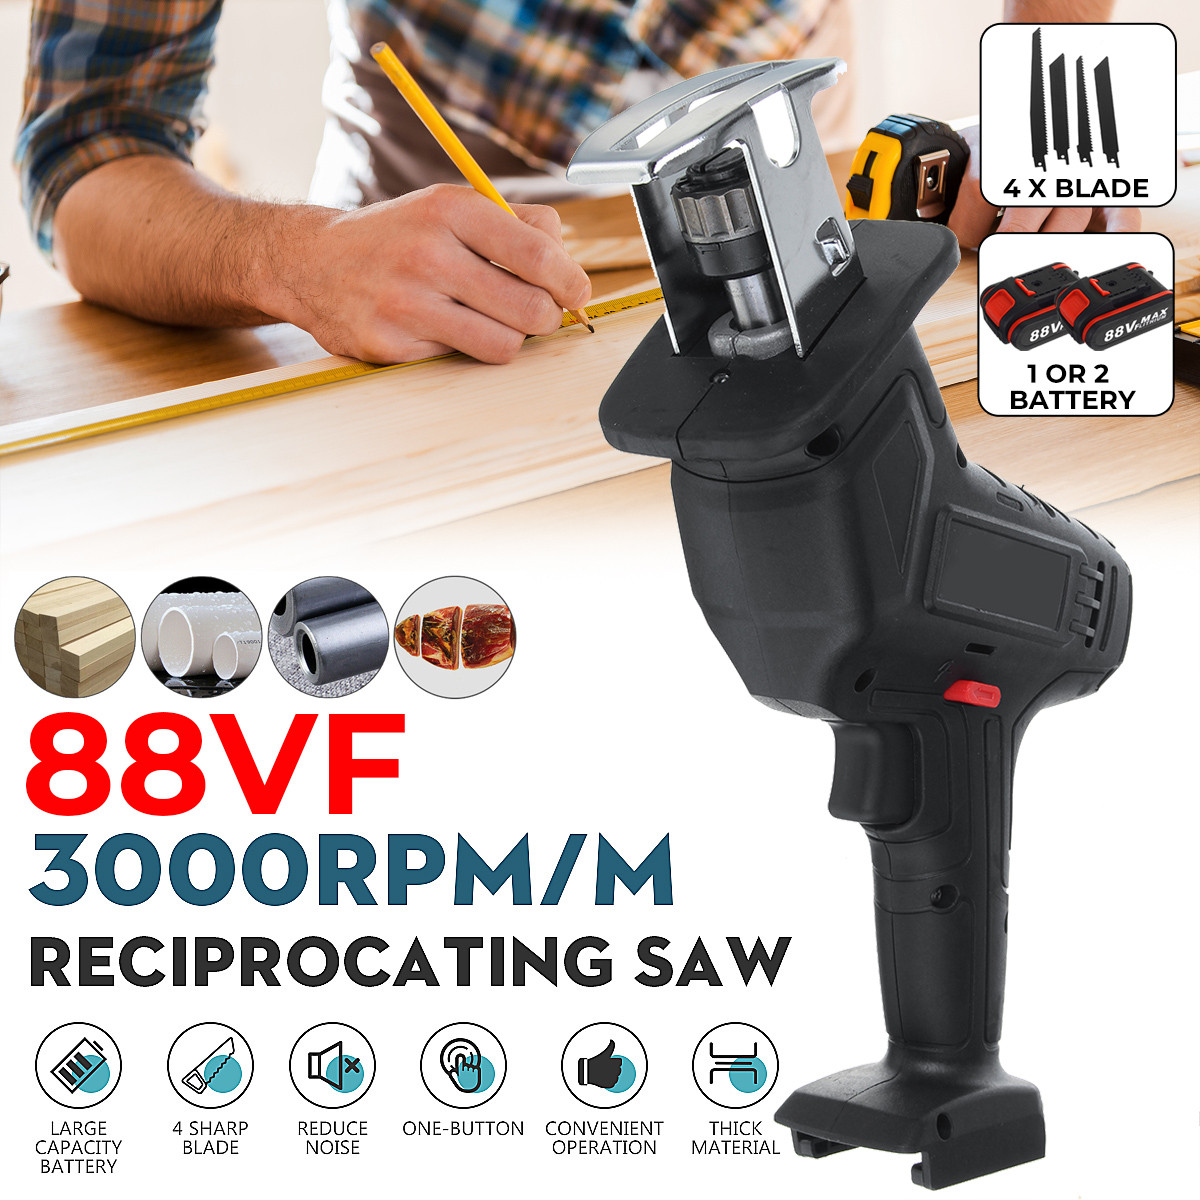 88VF-Cordless-Rechargeable-Electric-Reciprocating-Saw-Portable-Wood-Metal-Plastic-Cutting-Tool-W-1-o-1772566-2